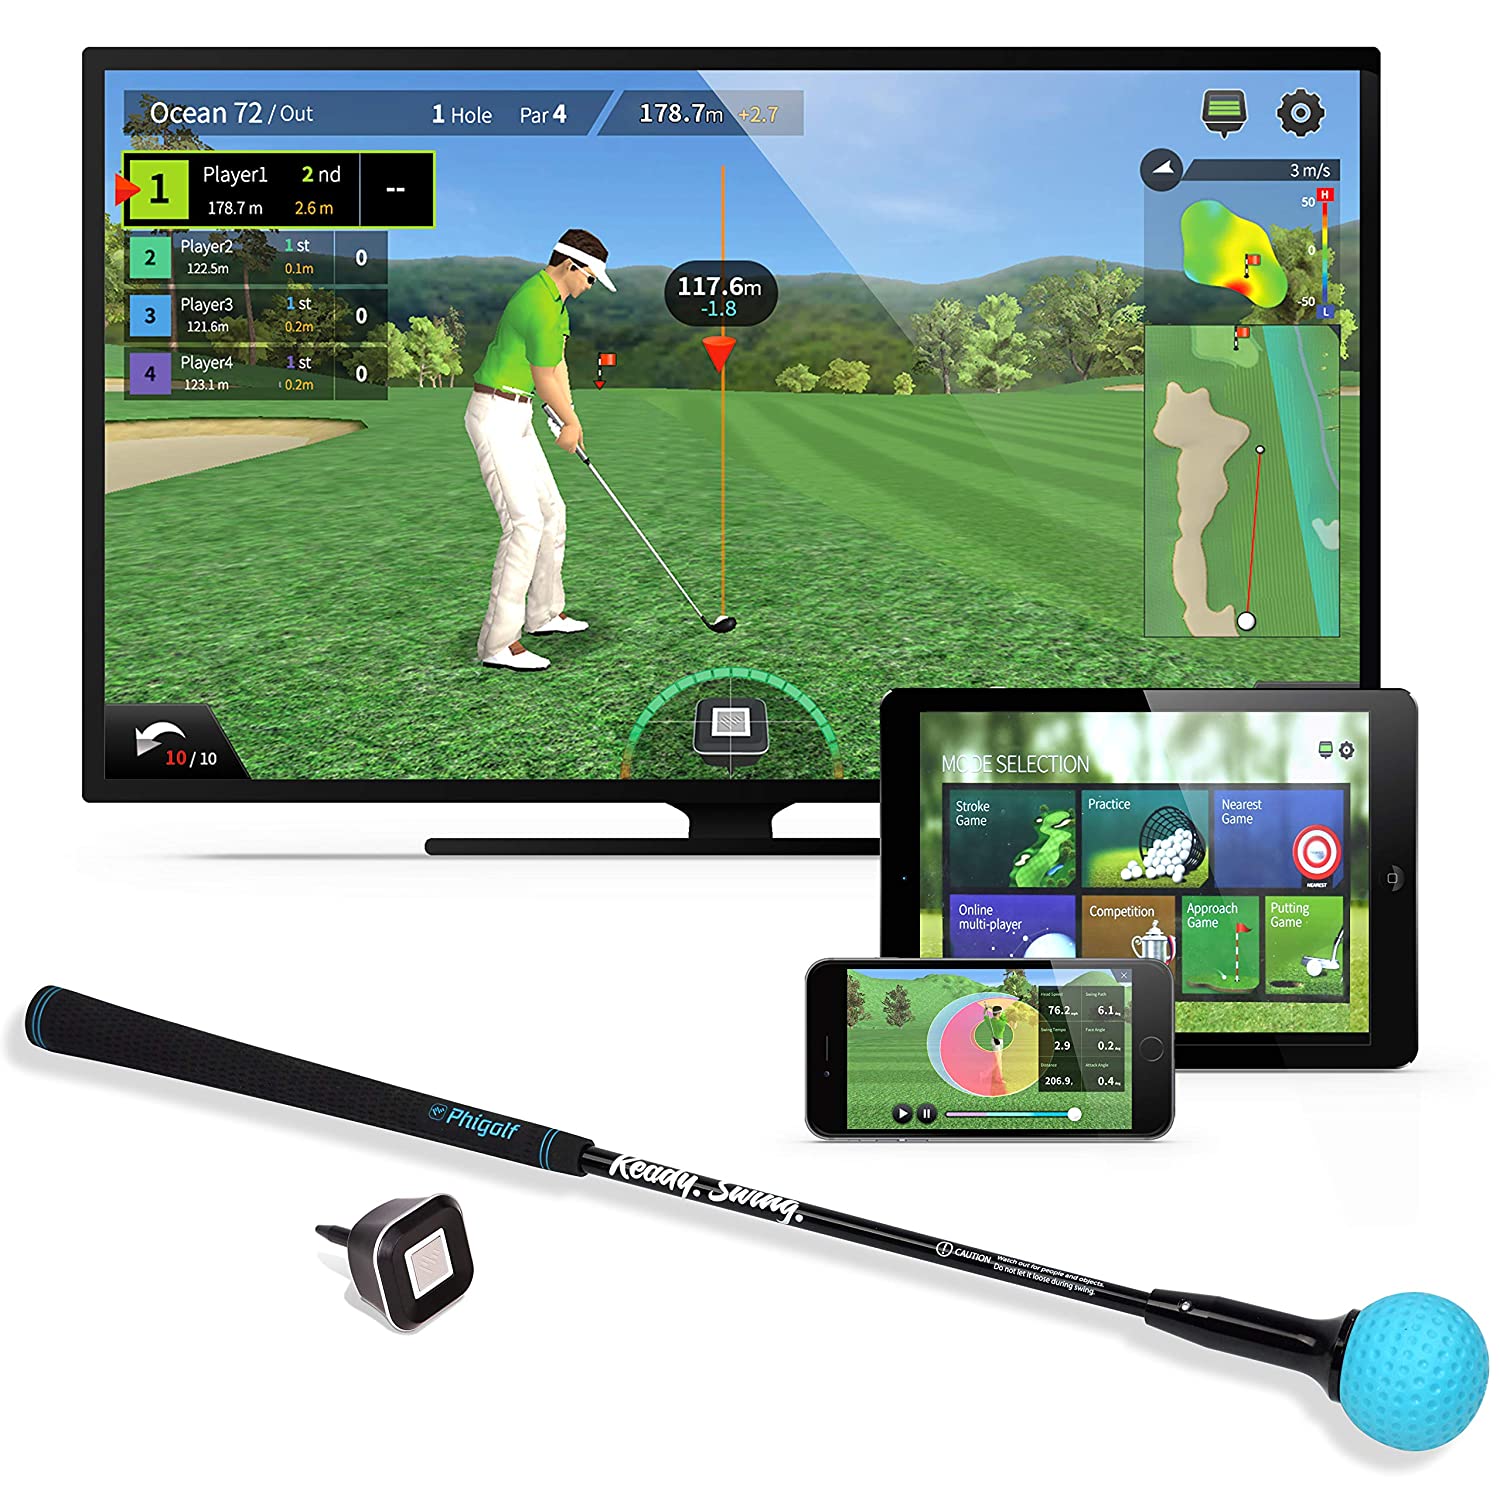 What are the key benefits of Golf SIM?